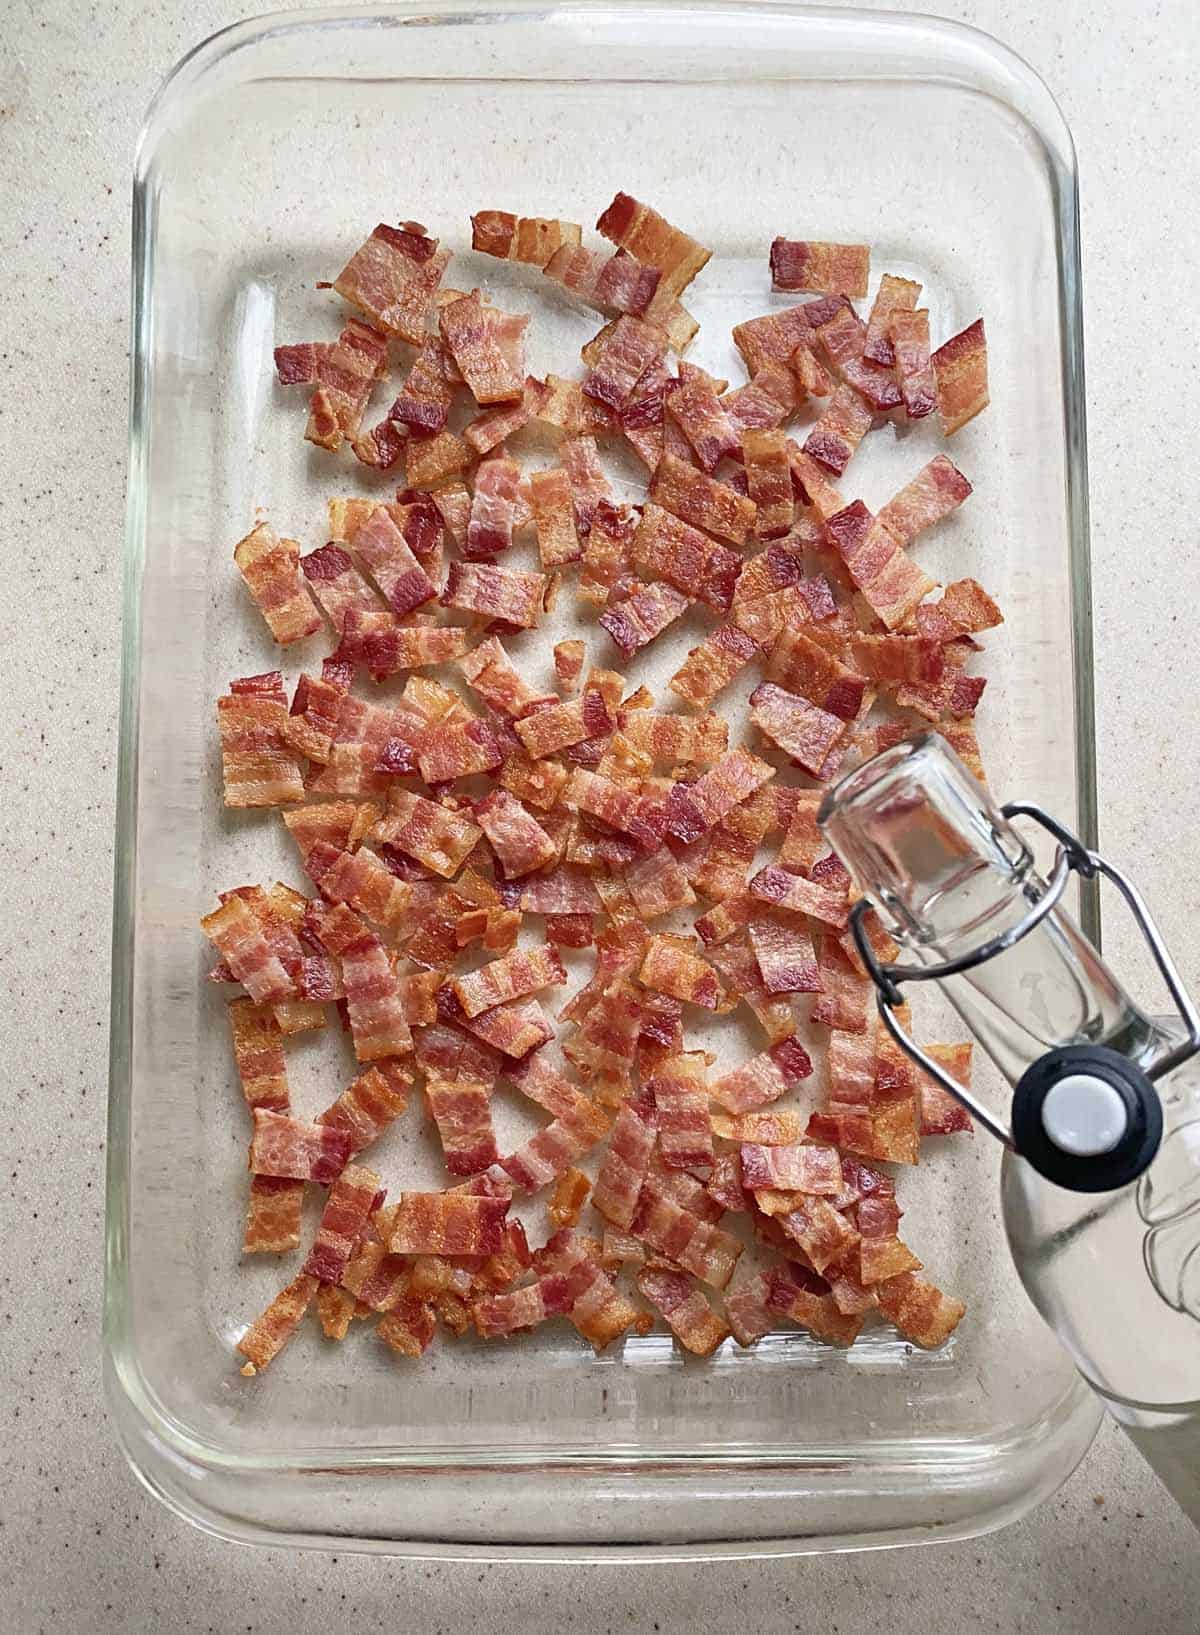 Pouring vodka over chopped cooked bacon in a 9 x 13 inch glass baking dish